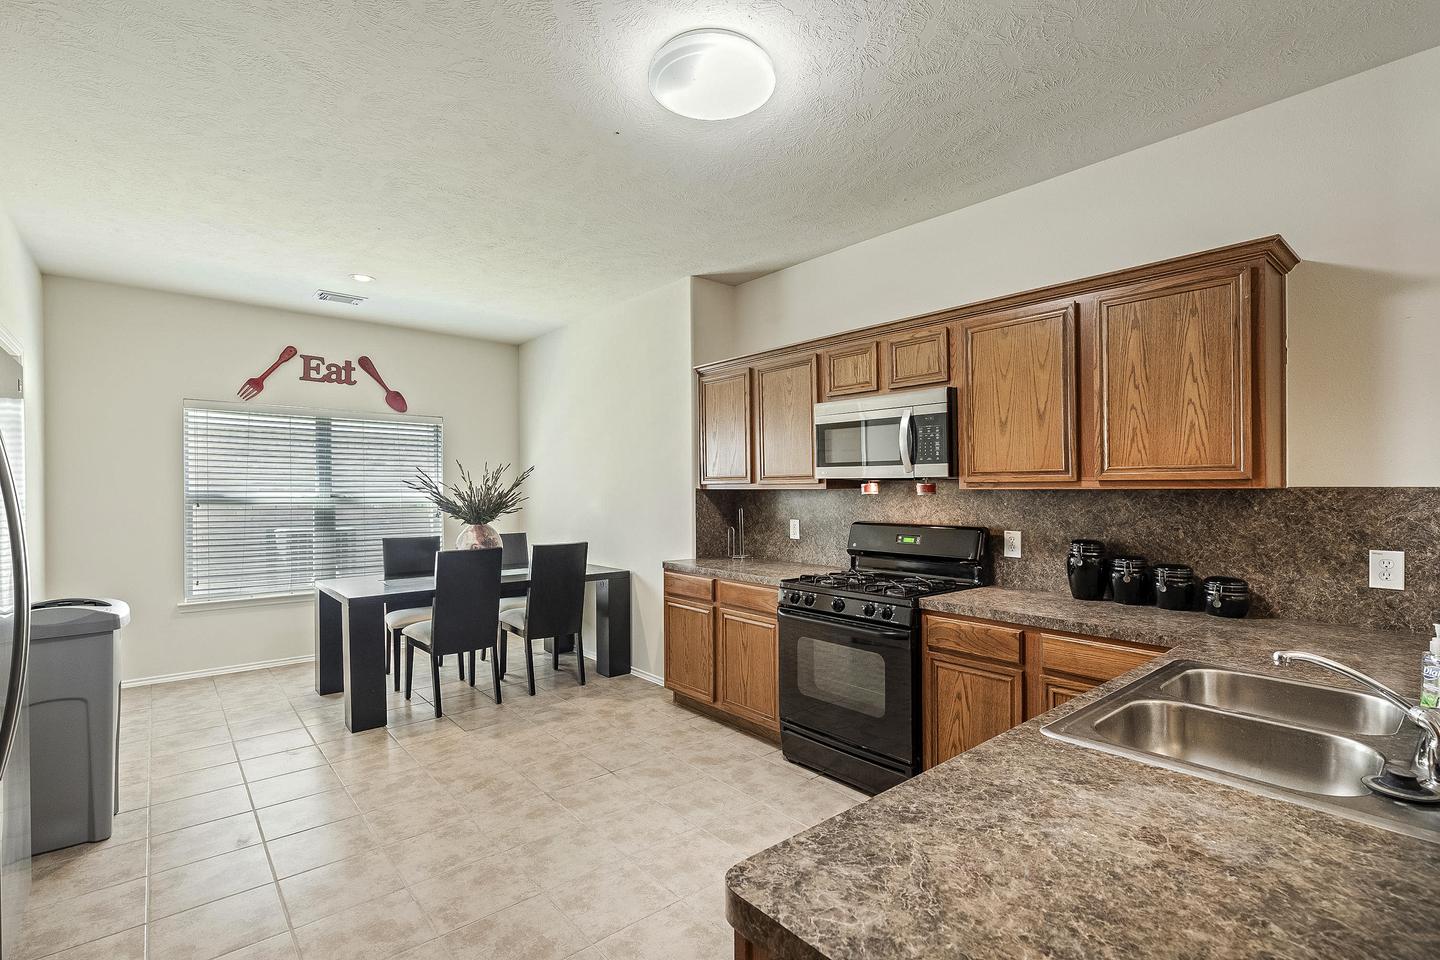 Enjoy some grub in this gorgeous and spacious open concept kitchen with gas stove and stainless steel refrigerator!